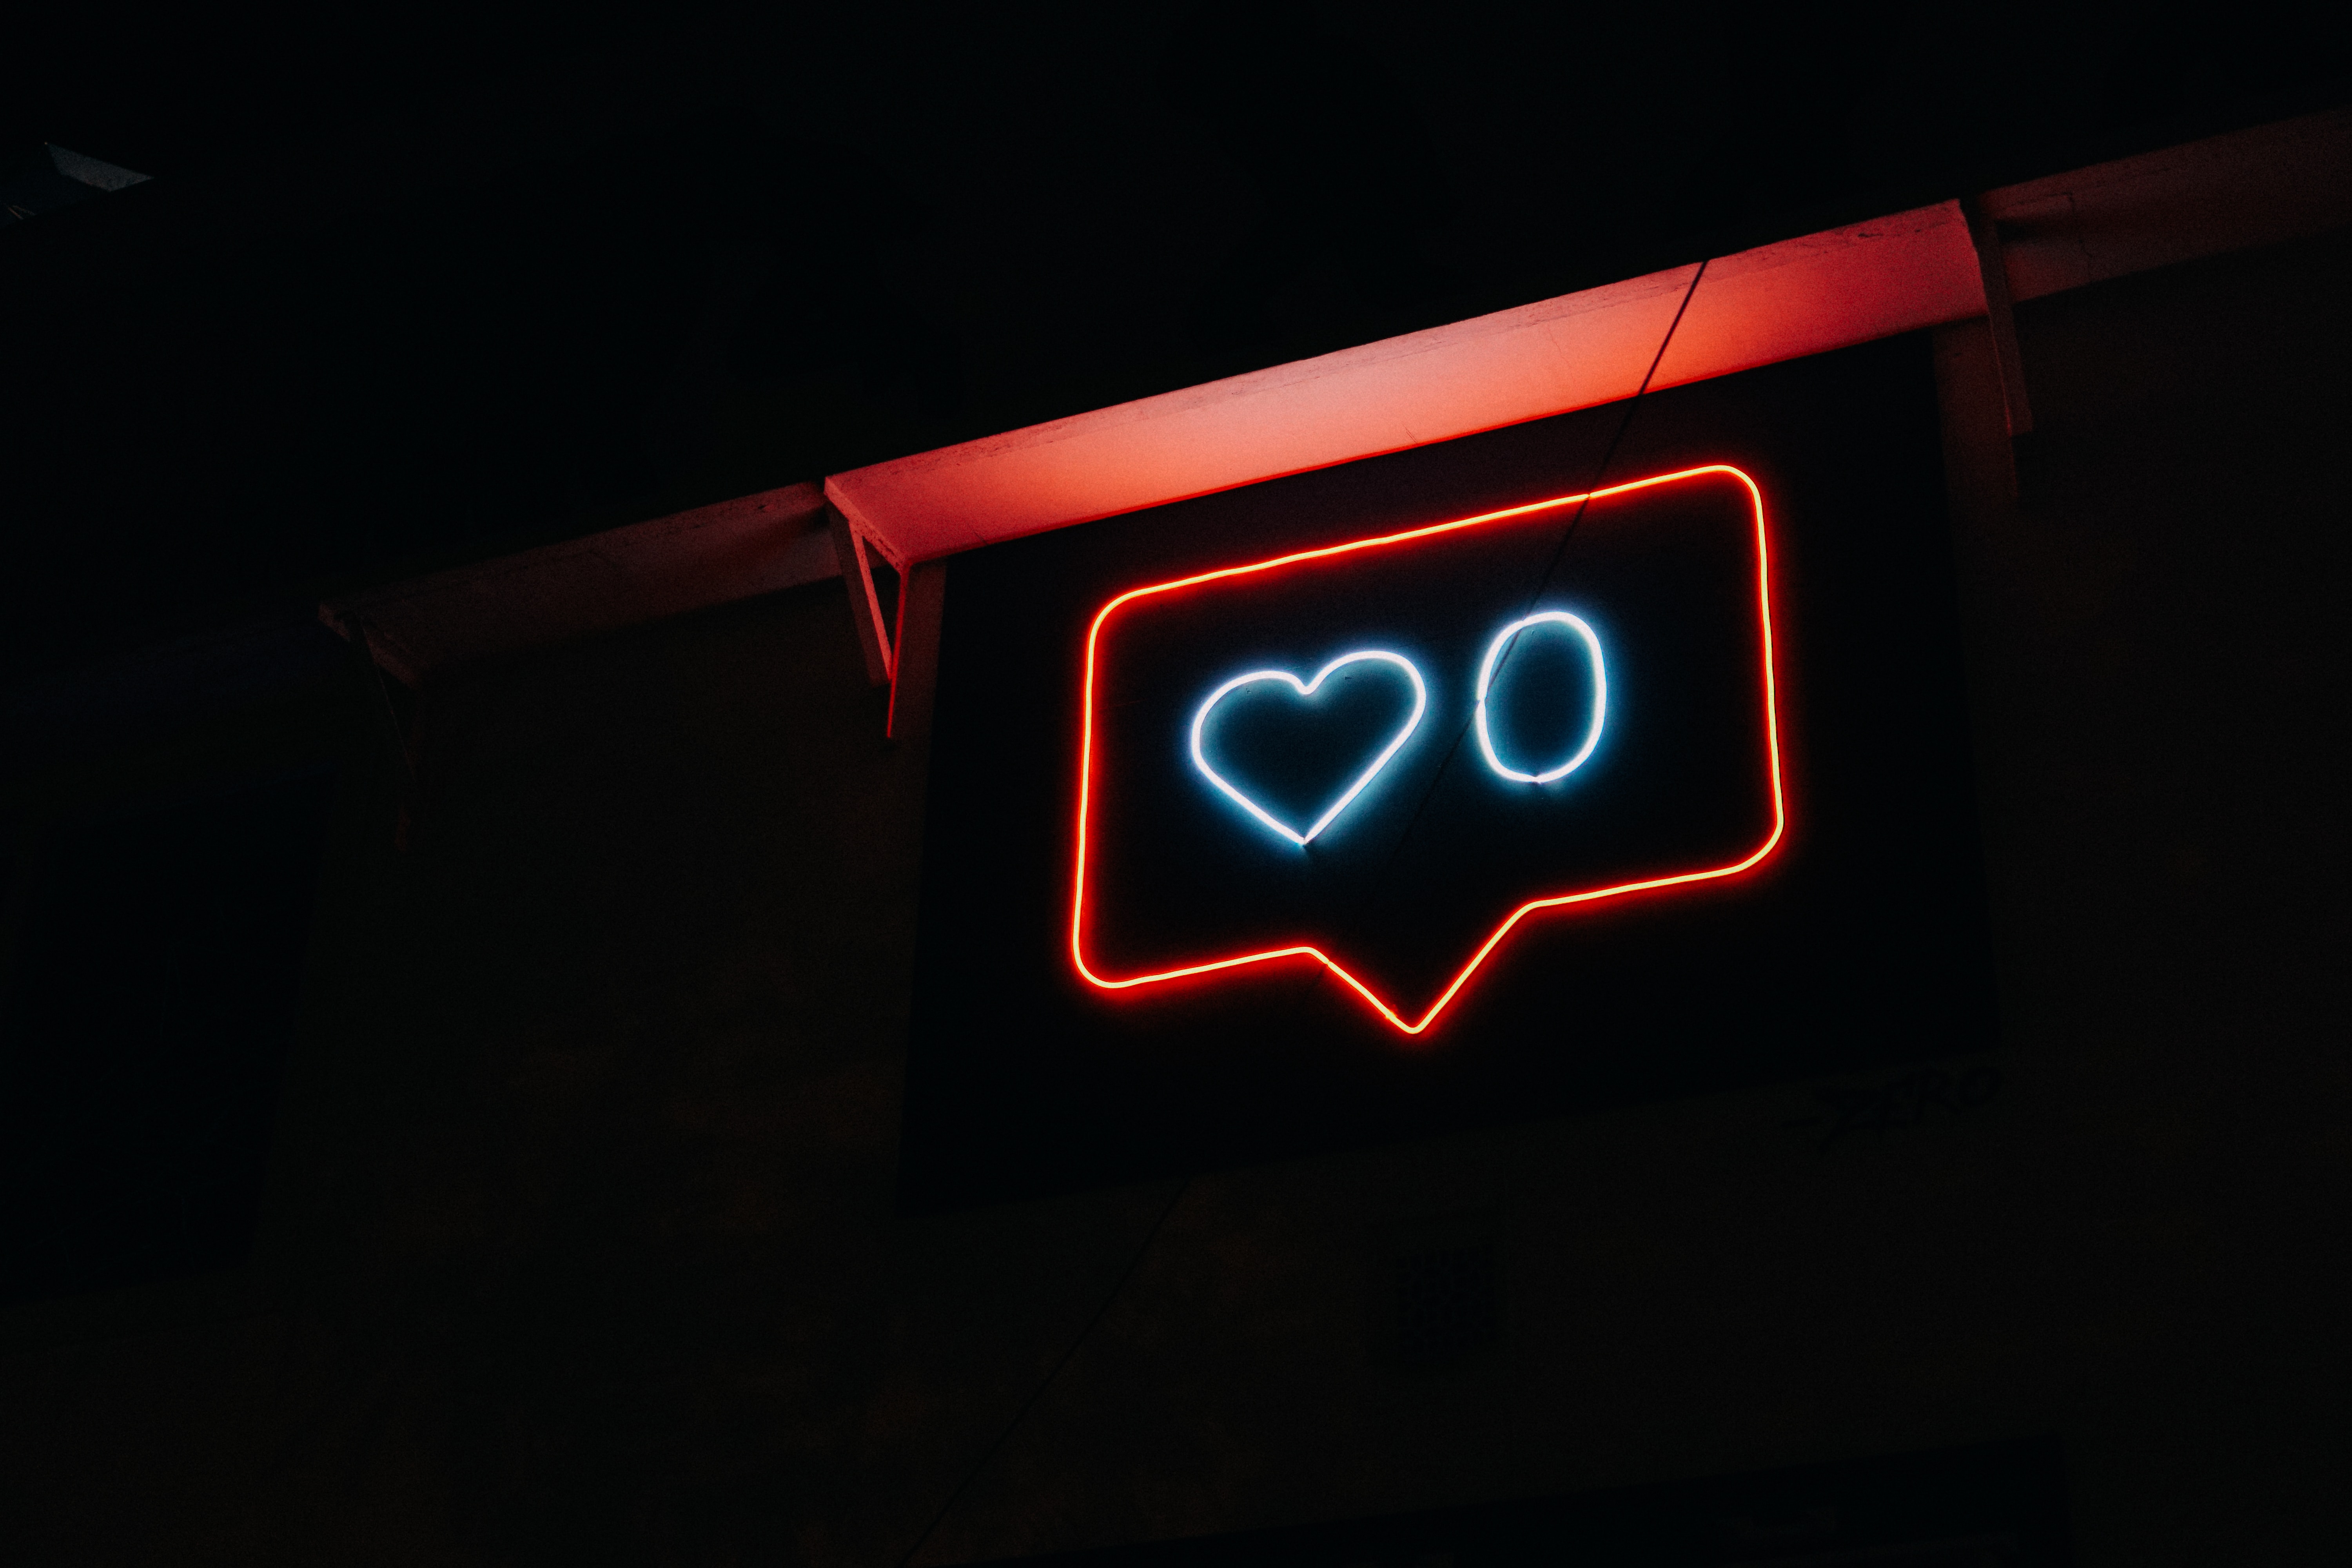 A neon sign in the design of the Instagram like feature, with a love heart and a zero inside it.